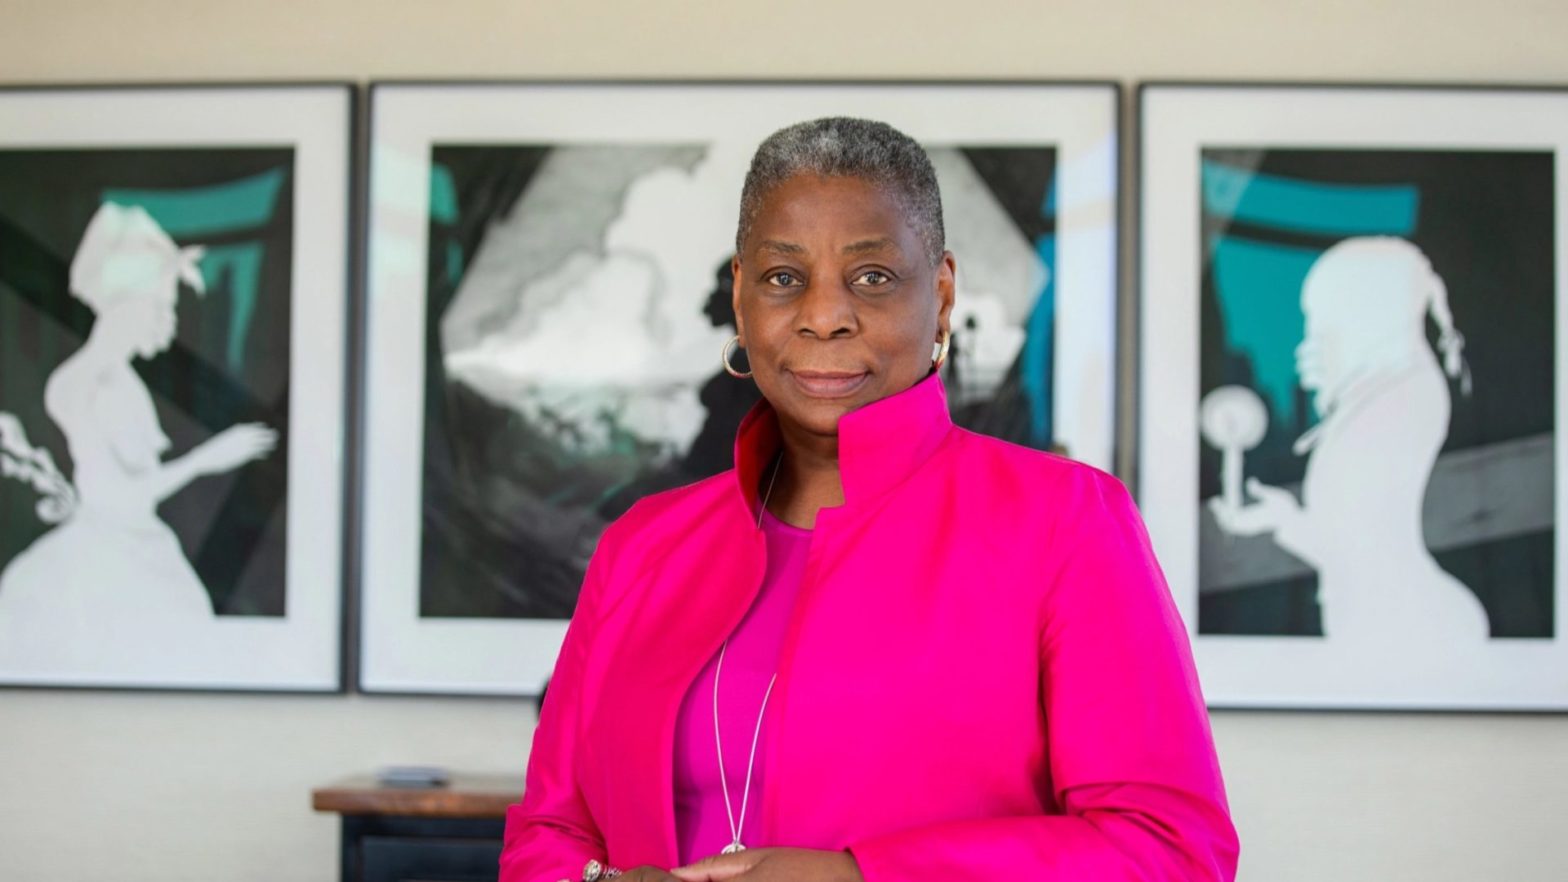 Ursula Burns, The First Black Woman CEO In The Fortune 500, Details What It's Like To Serve On Various Boards